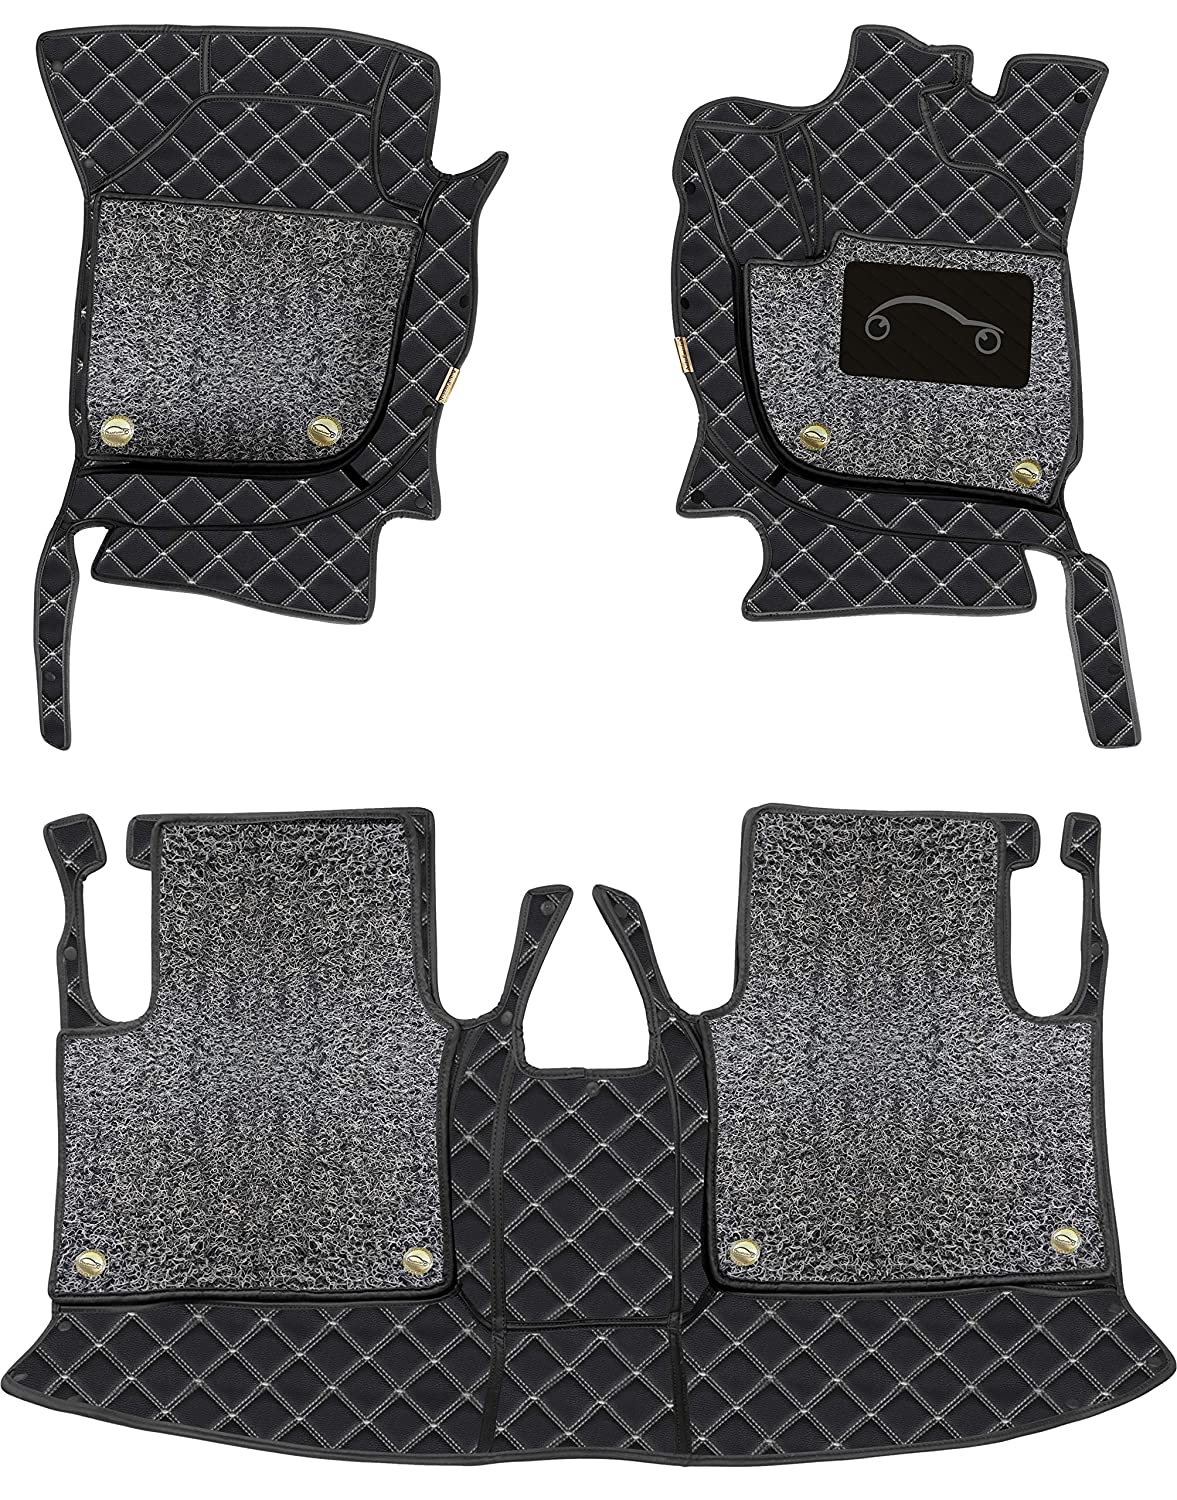 Jaguar F-Pace -2016-7D Luxury Car Mat, All Weather Proof, Anti-Skid, 100% Waterproof & Odorless with Unique Diamond Fish Design (24mm Luxury PU Leather, 2 Rows)